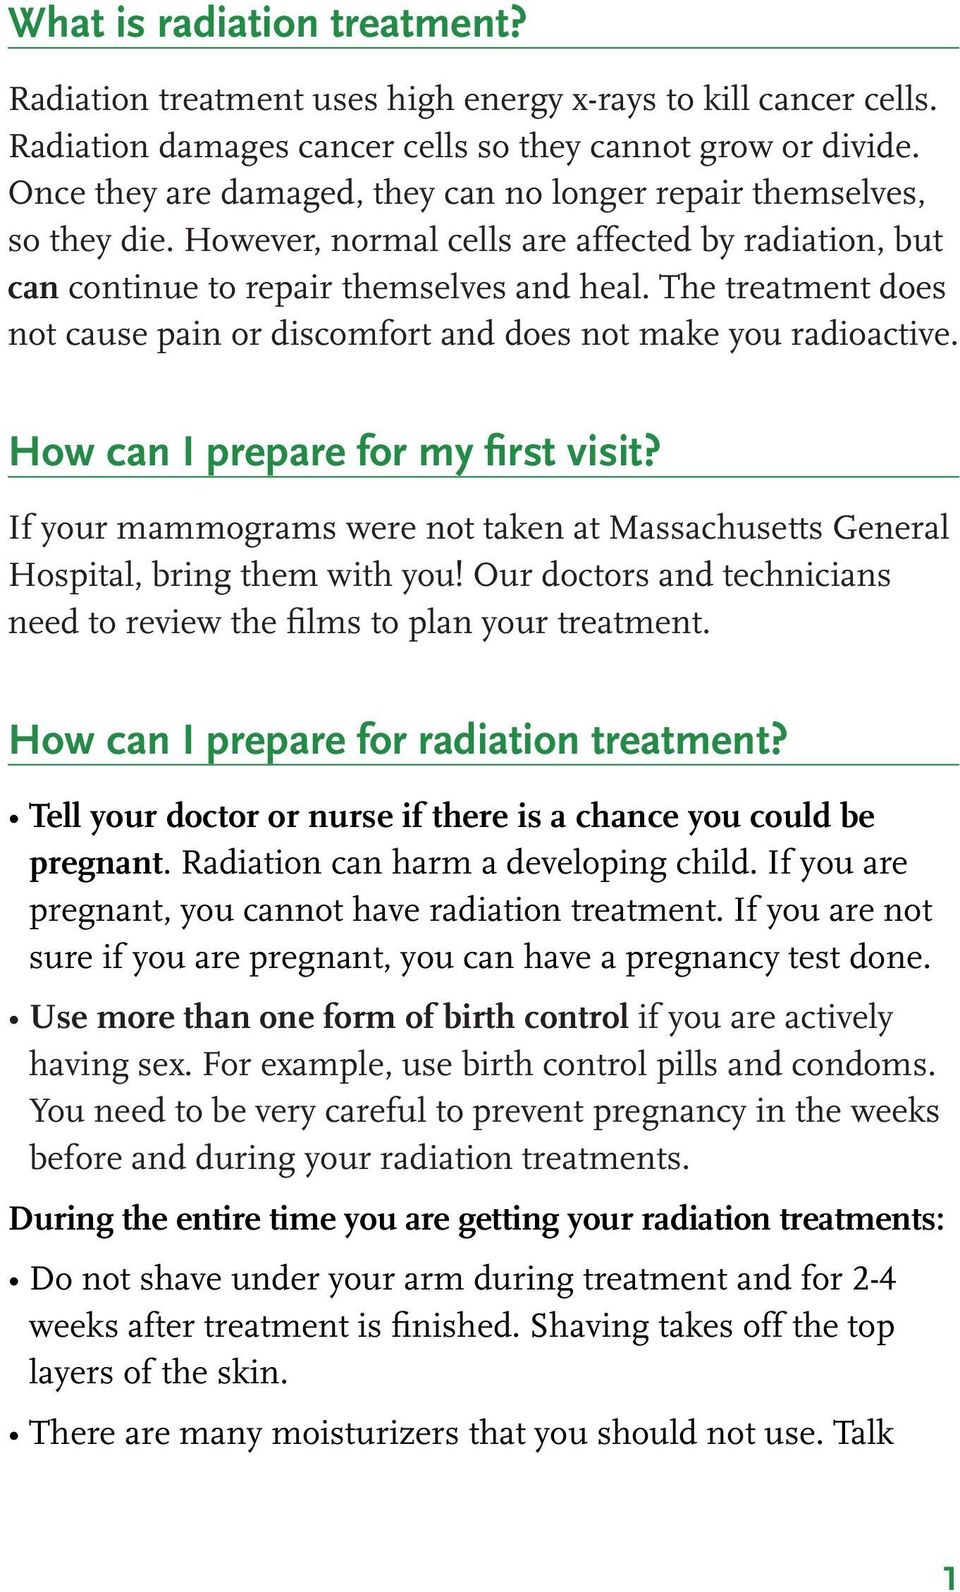 The treatment does not cause pain or discomfort and does not make you radioactive. How can I prepare for my first visit?